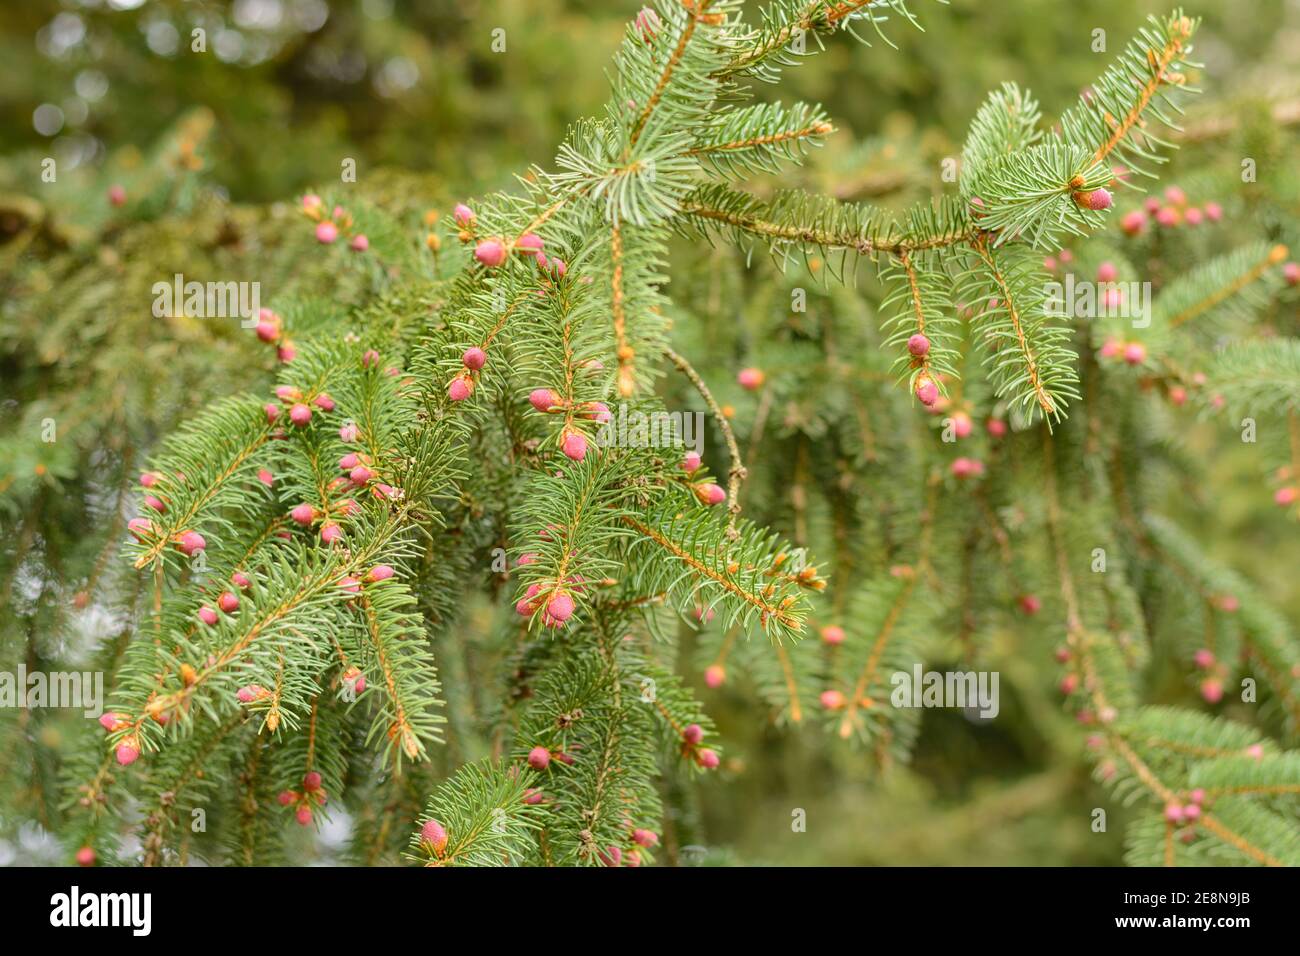 Norway Spruce - Young Spruce Cones As Flower Buds Stock Photo